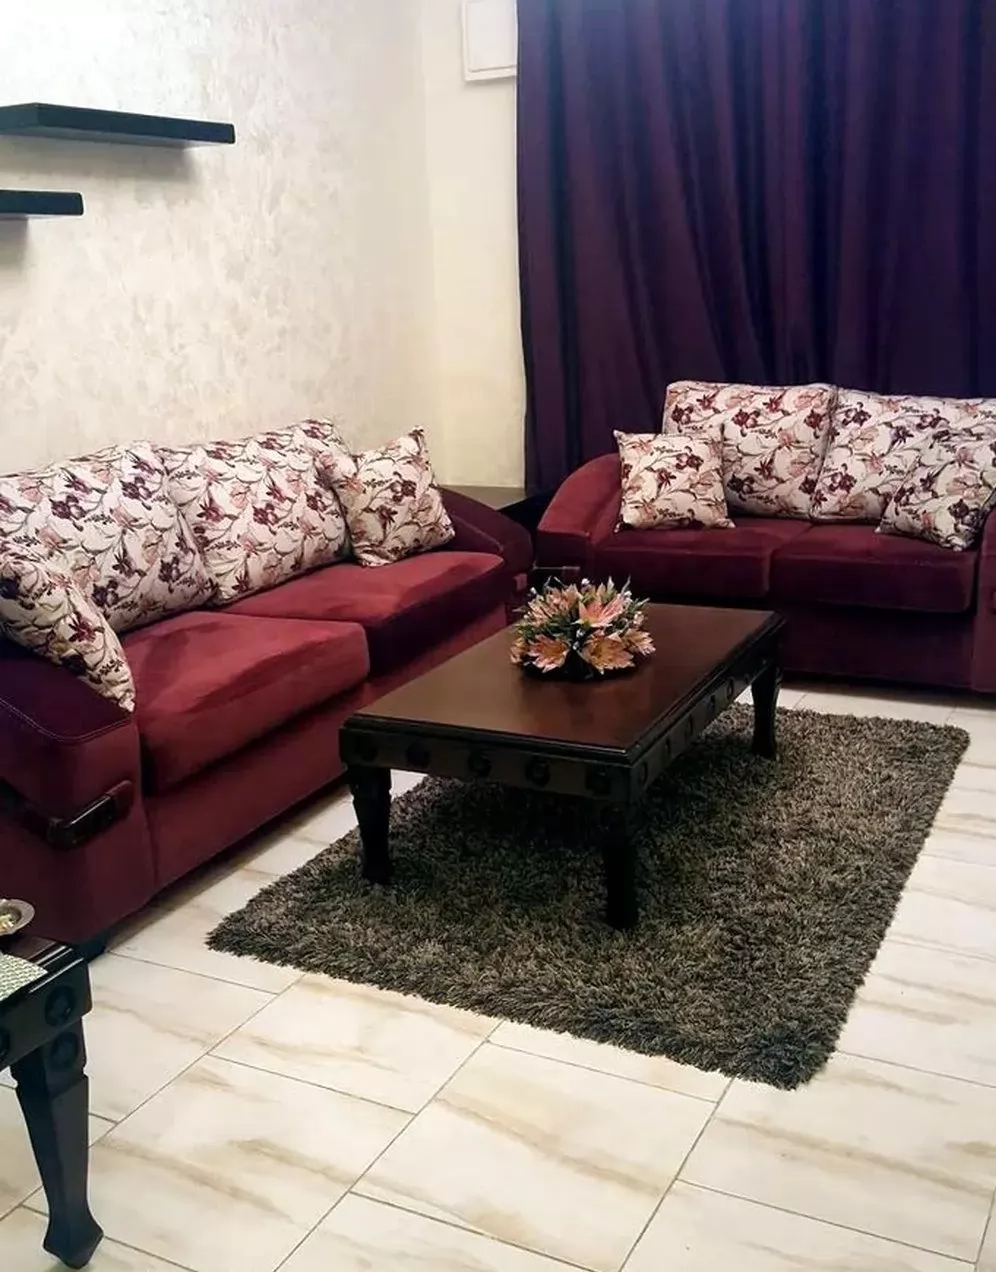 Residential Ready Property Studio F/F Apartment  for sale in Amman #25741 - 1  image 